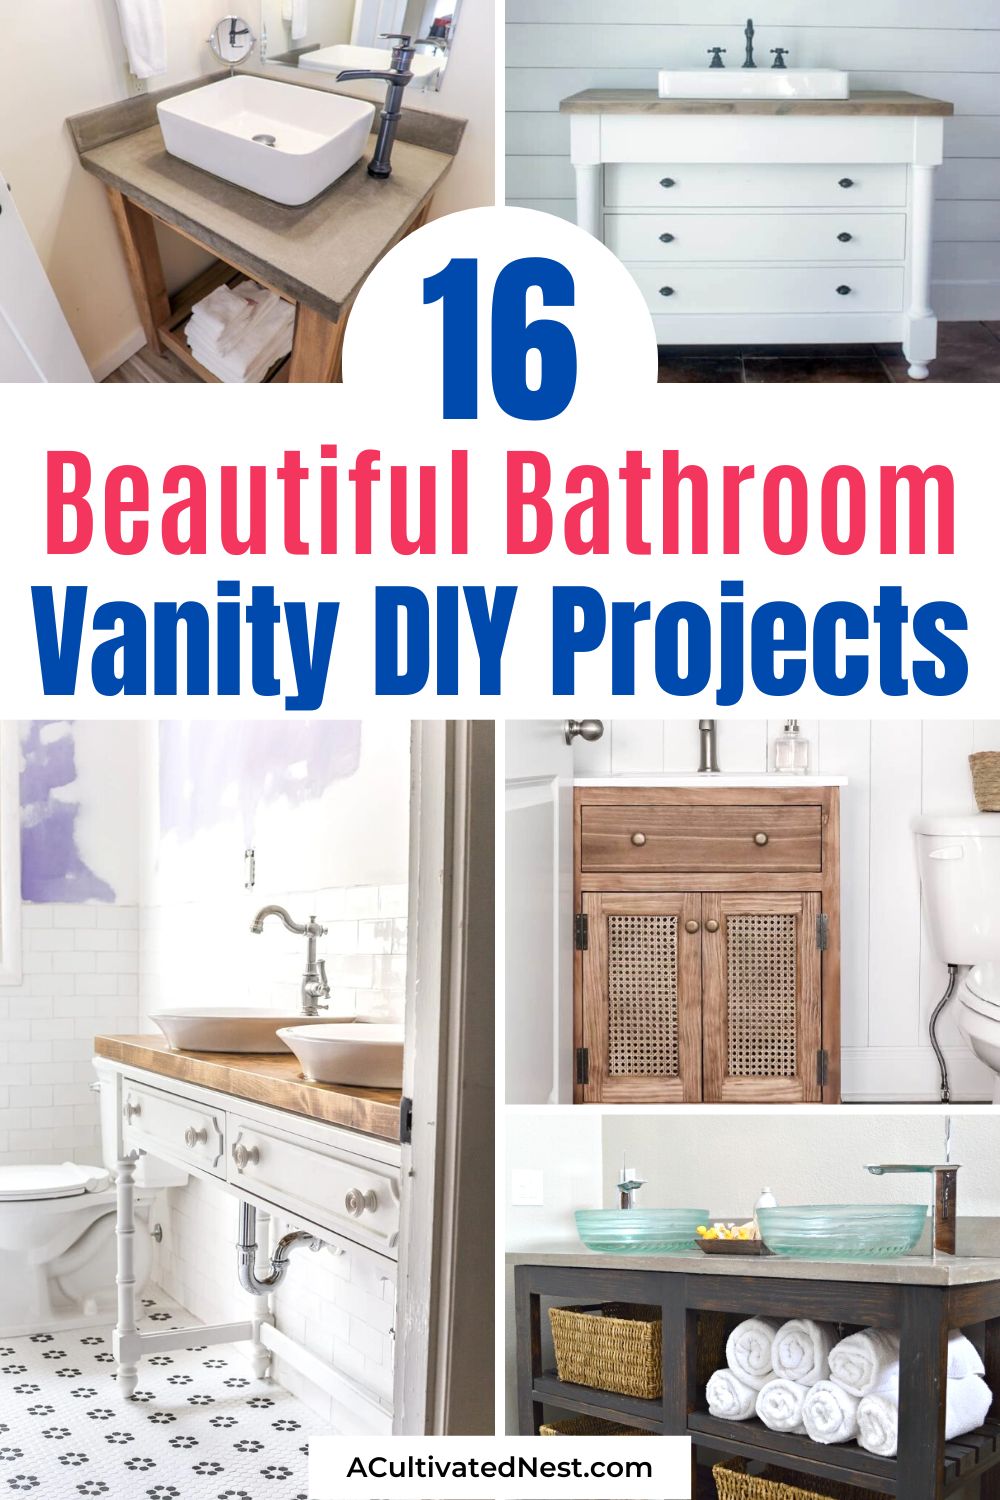 16 Beautiful Bathroom Vanity DIY Projects- Want to update your bathroom on a budget? Check out these beautiful bathroom vanity DIY projects to give your bathroom a fresh new look! | #diyProjects #bathroomDIY #bathroomDecor #bathroomRenovation #ACultivatedNest